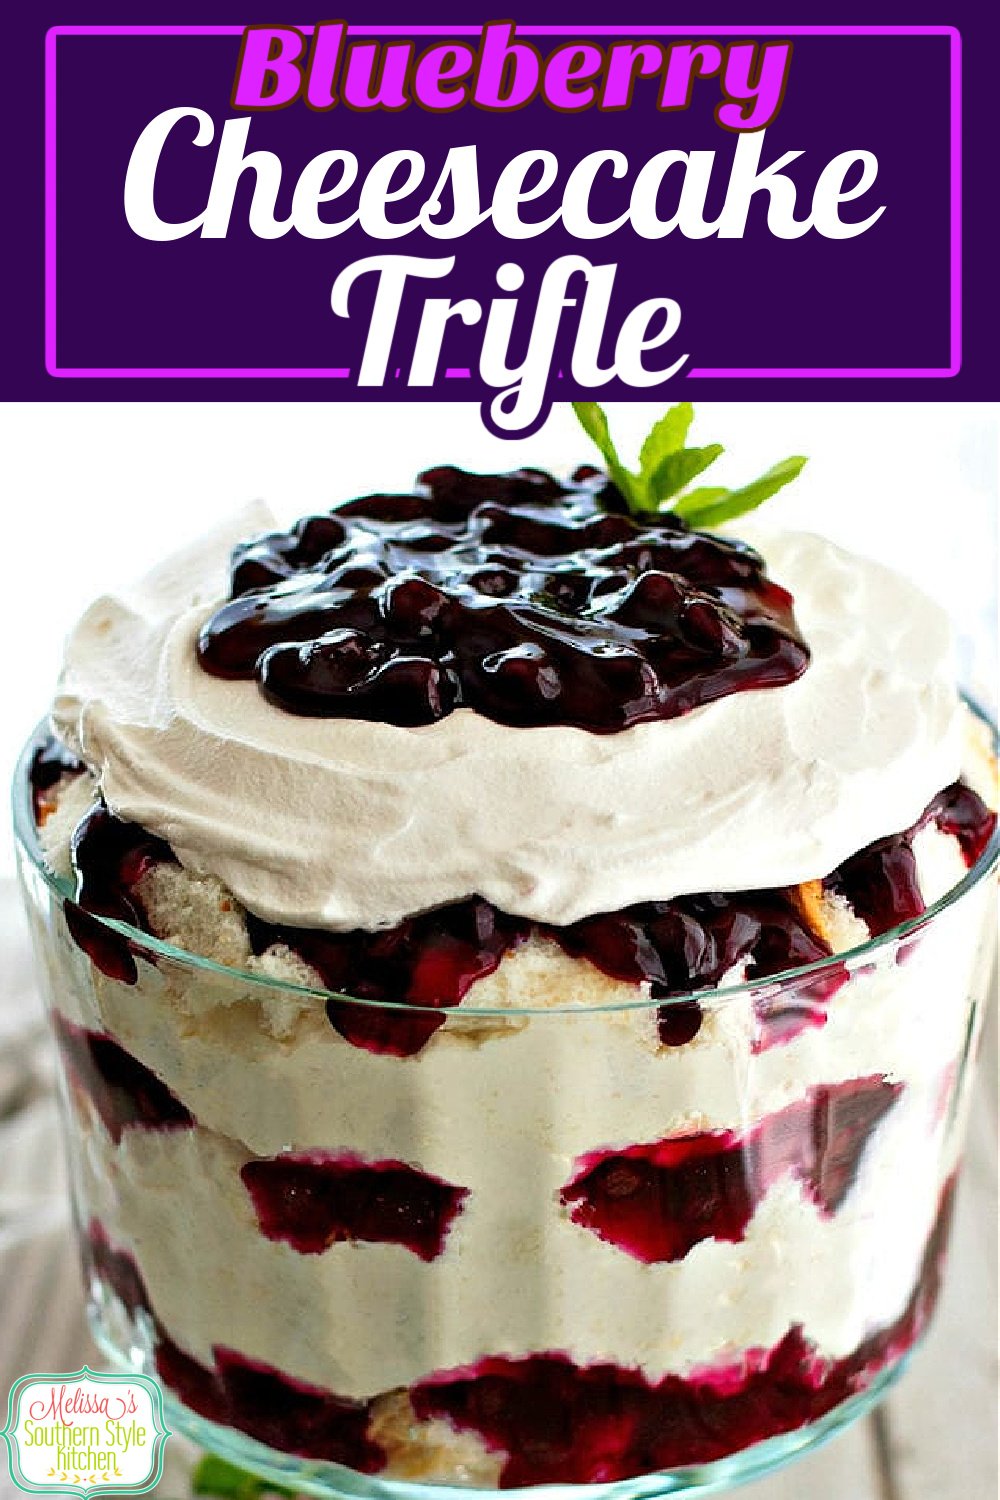 Layers of blueberries and cheesecake shine in this Easy Blueberry Cheesecake Trifle #cheesecaketrifle #blueberrytrifle #blueberrycheesecaketrifle #blueberries #desserts #dessertfoodrecipes #holidaydesserts #picnicfood #mothersdaydesserts #easter #southernfood #southernrecipes via @melissasssk